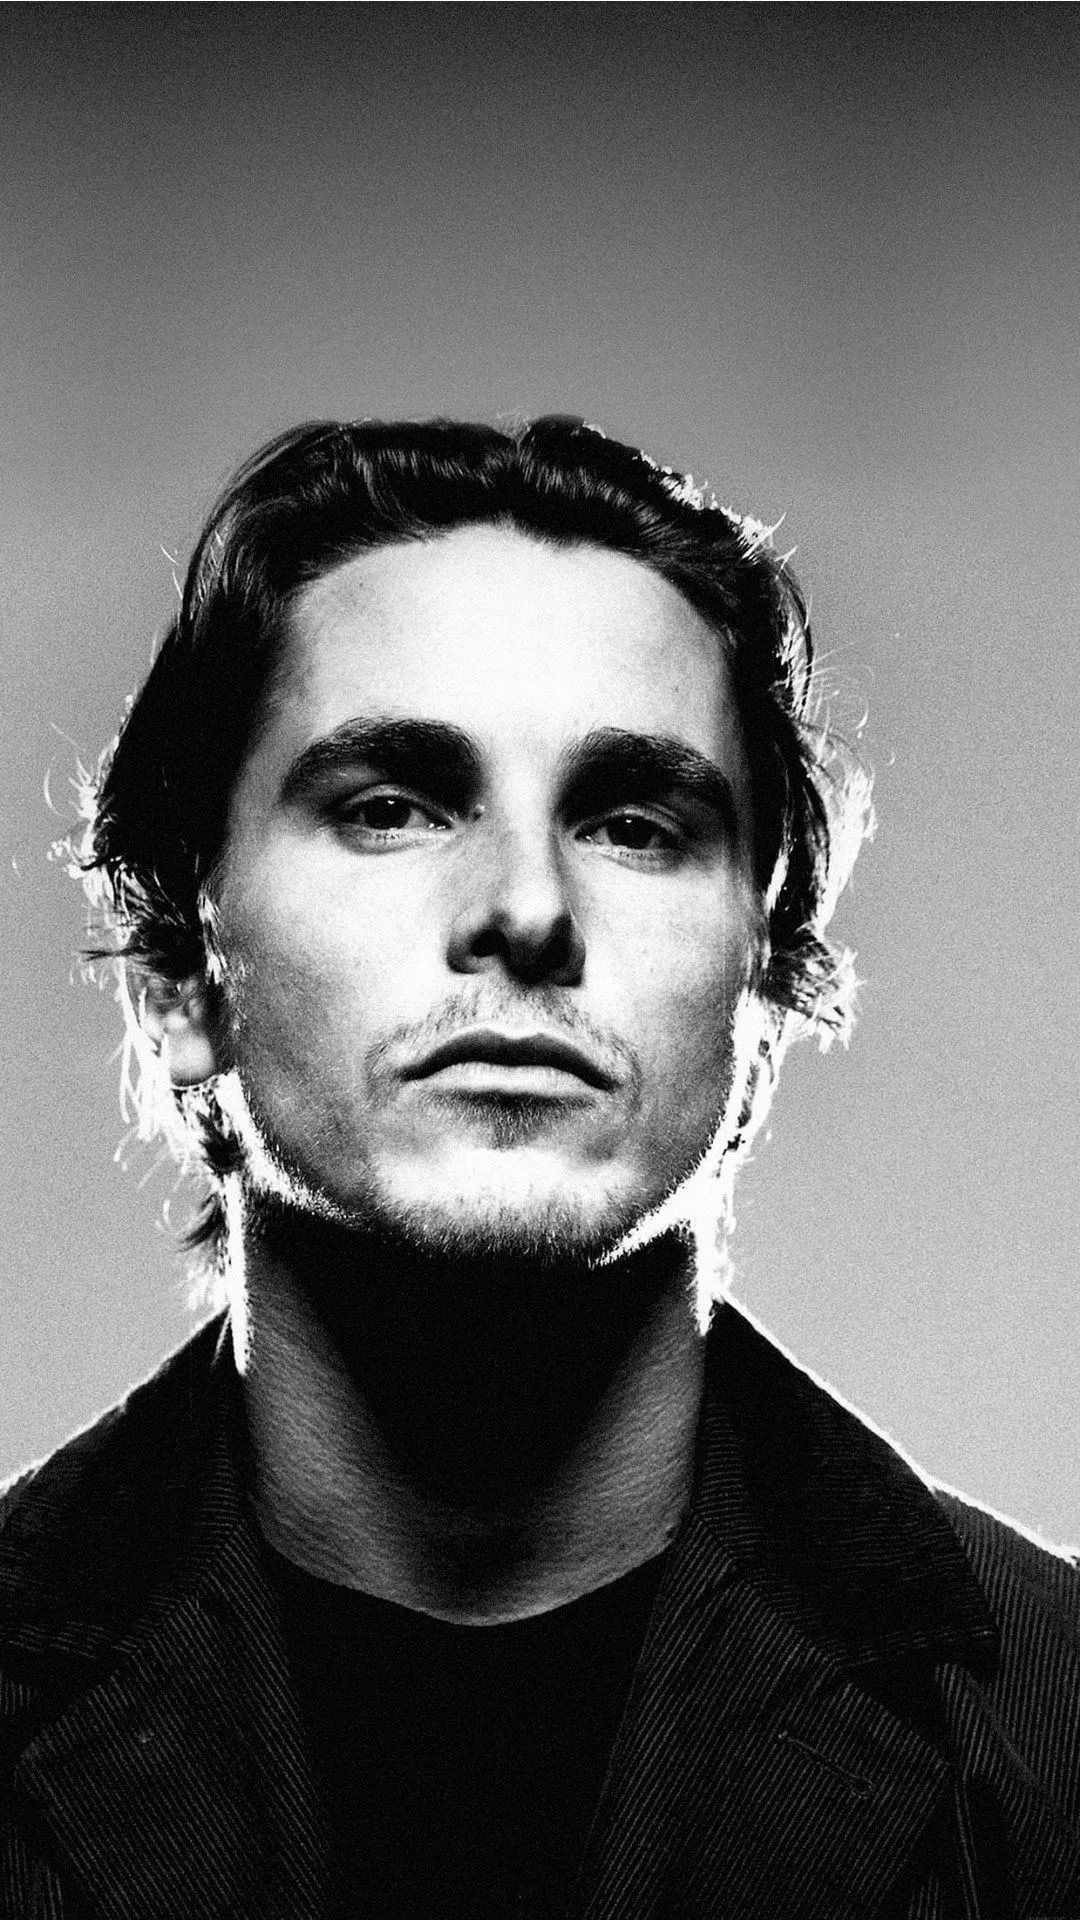 Christian Bale: Produced and appeared in David O. Russell's period film Amsterdam, Monochrome. 1080x1920 Full HD Background.